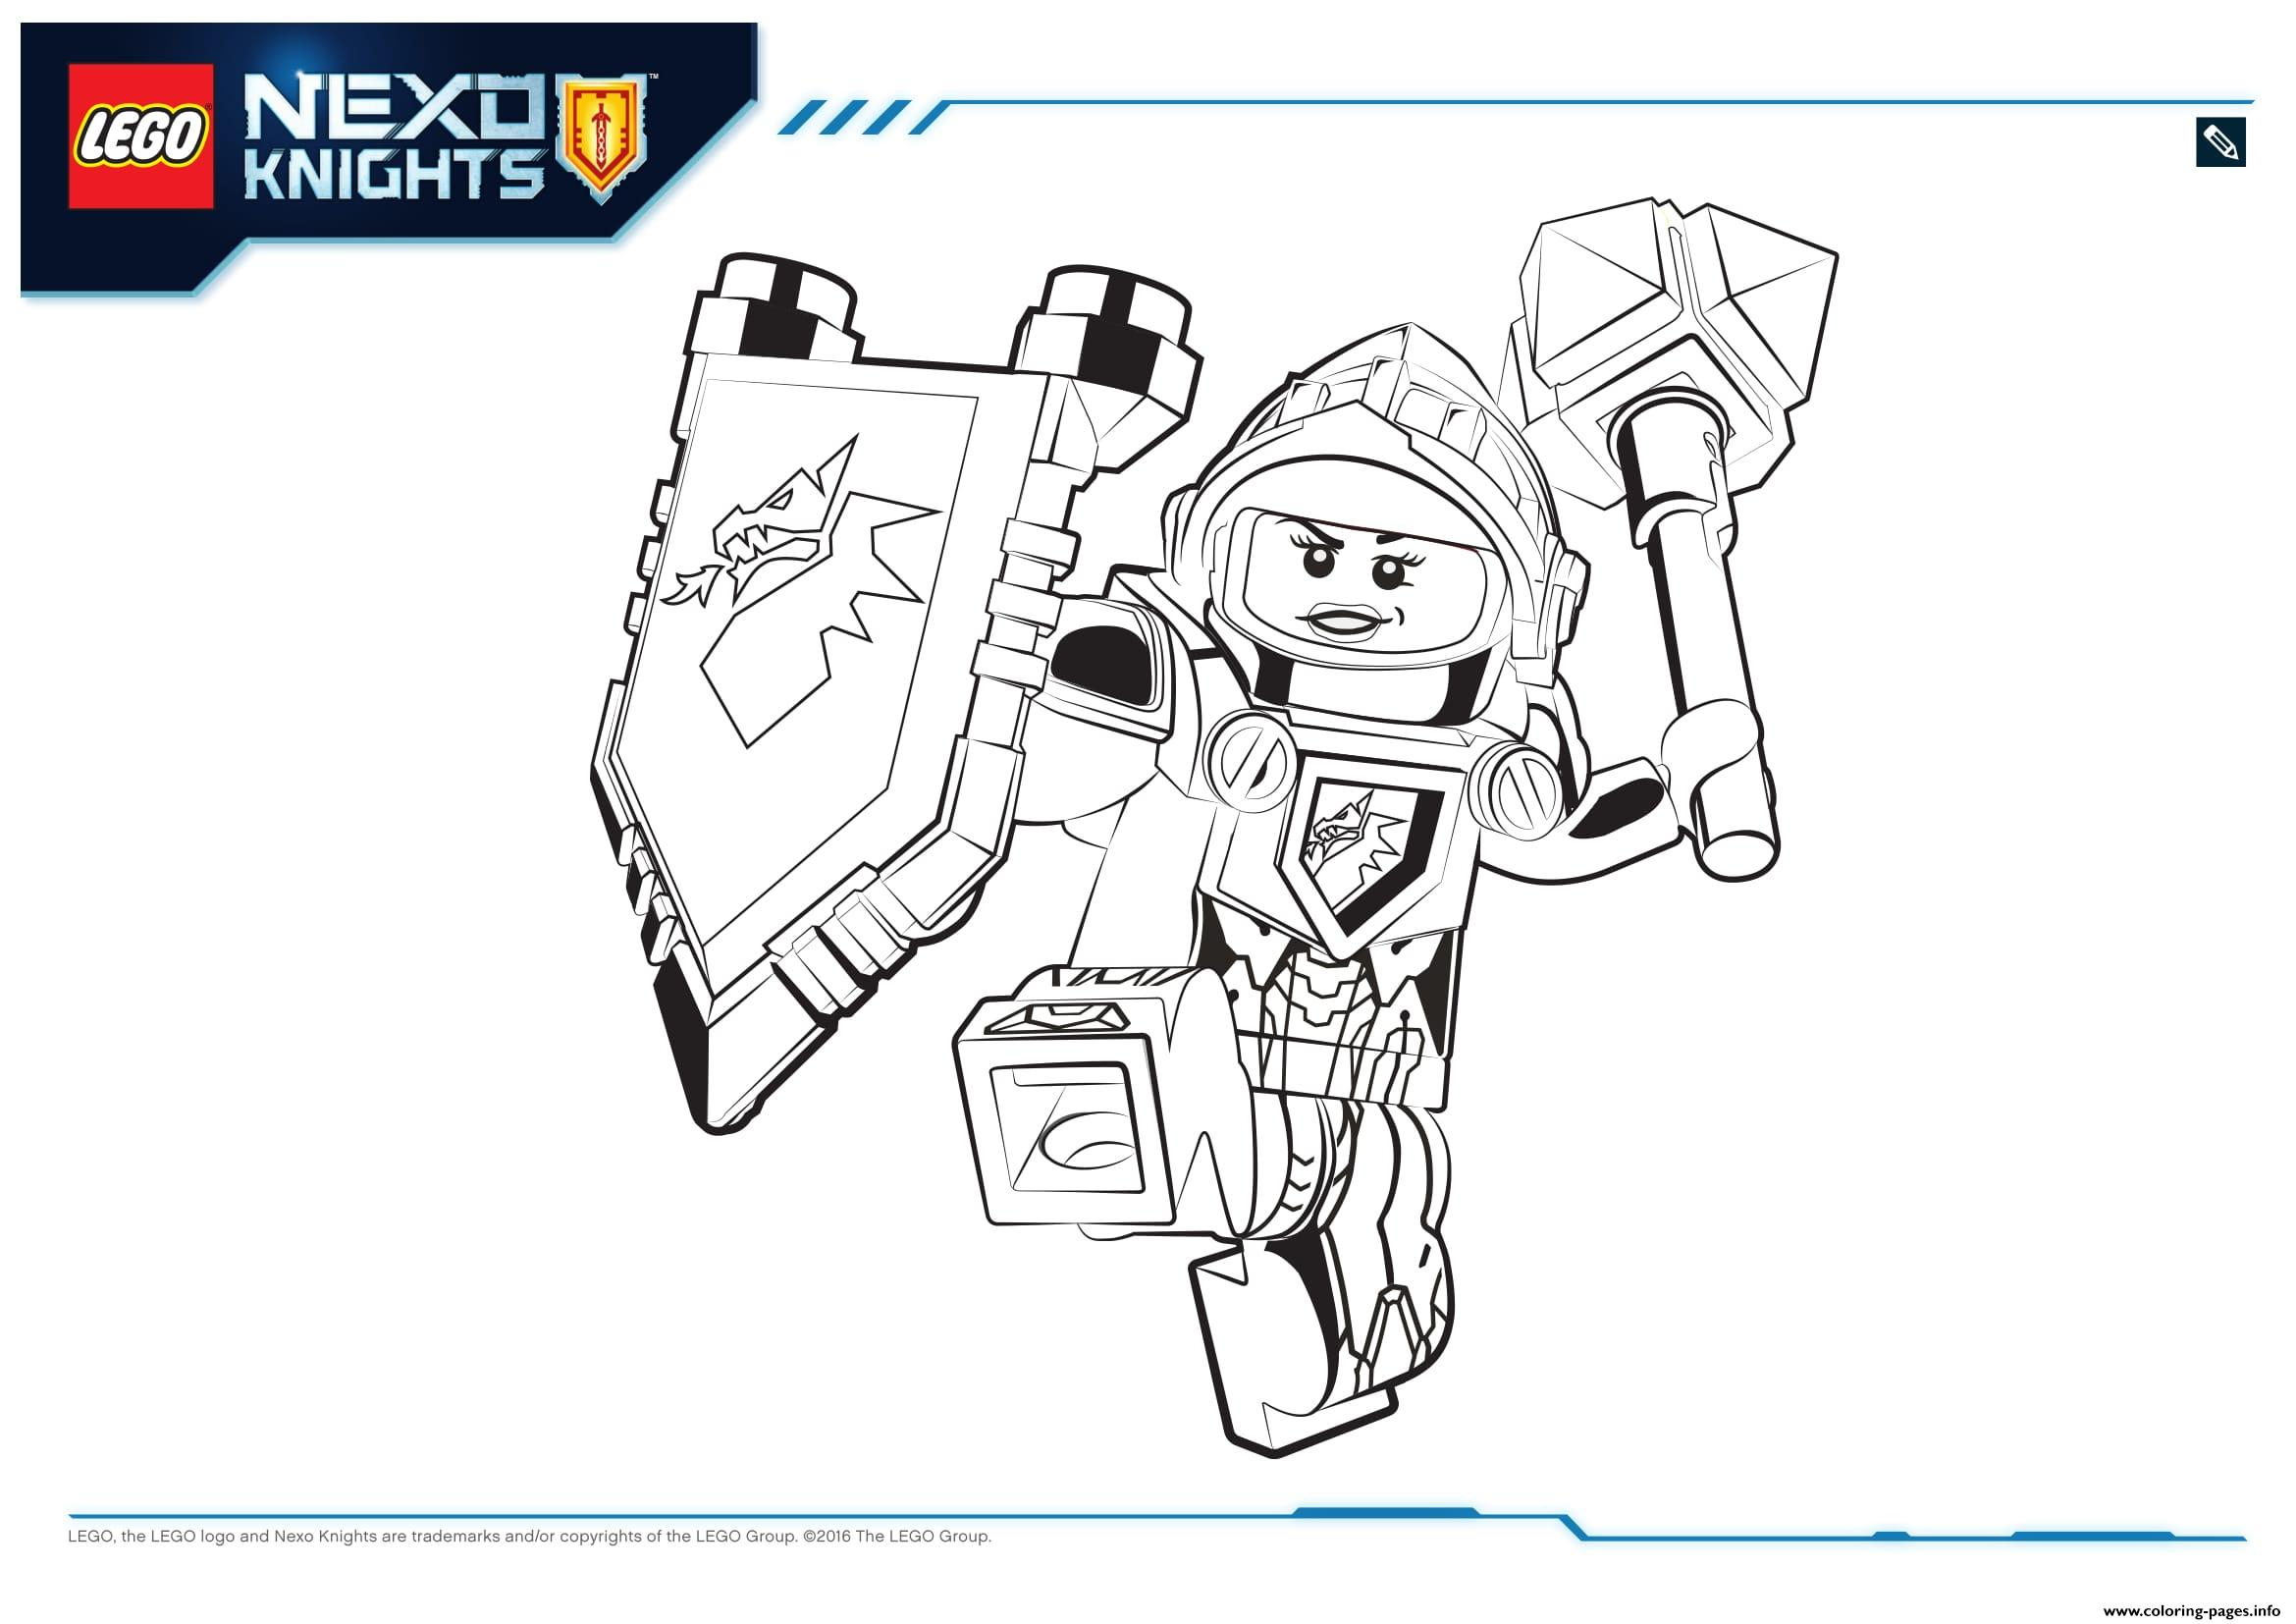 Nexo Knights Coloring Pages Lego Nexo Knights Coloring Pages For Kids Printable Coloring Page